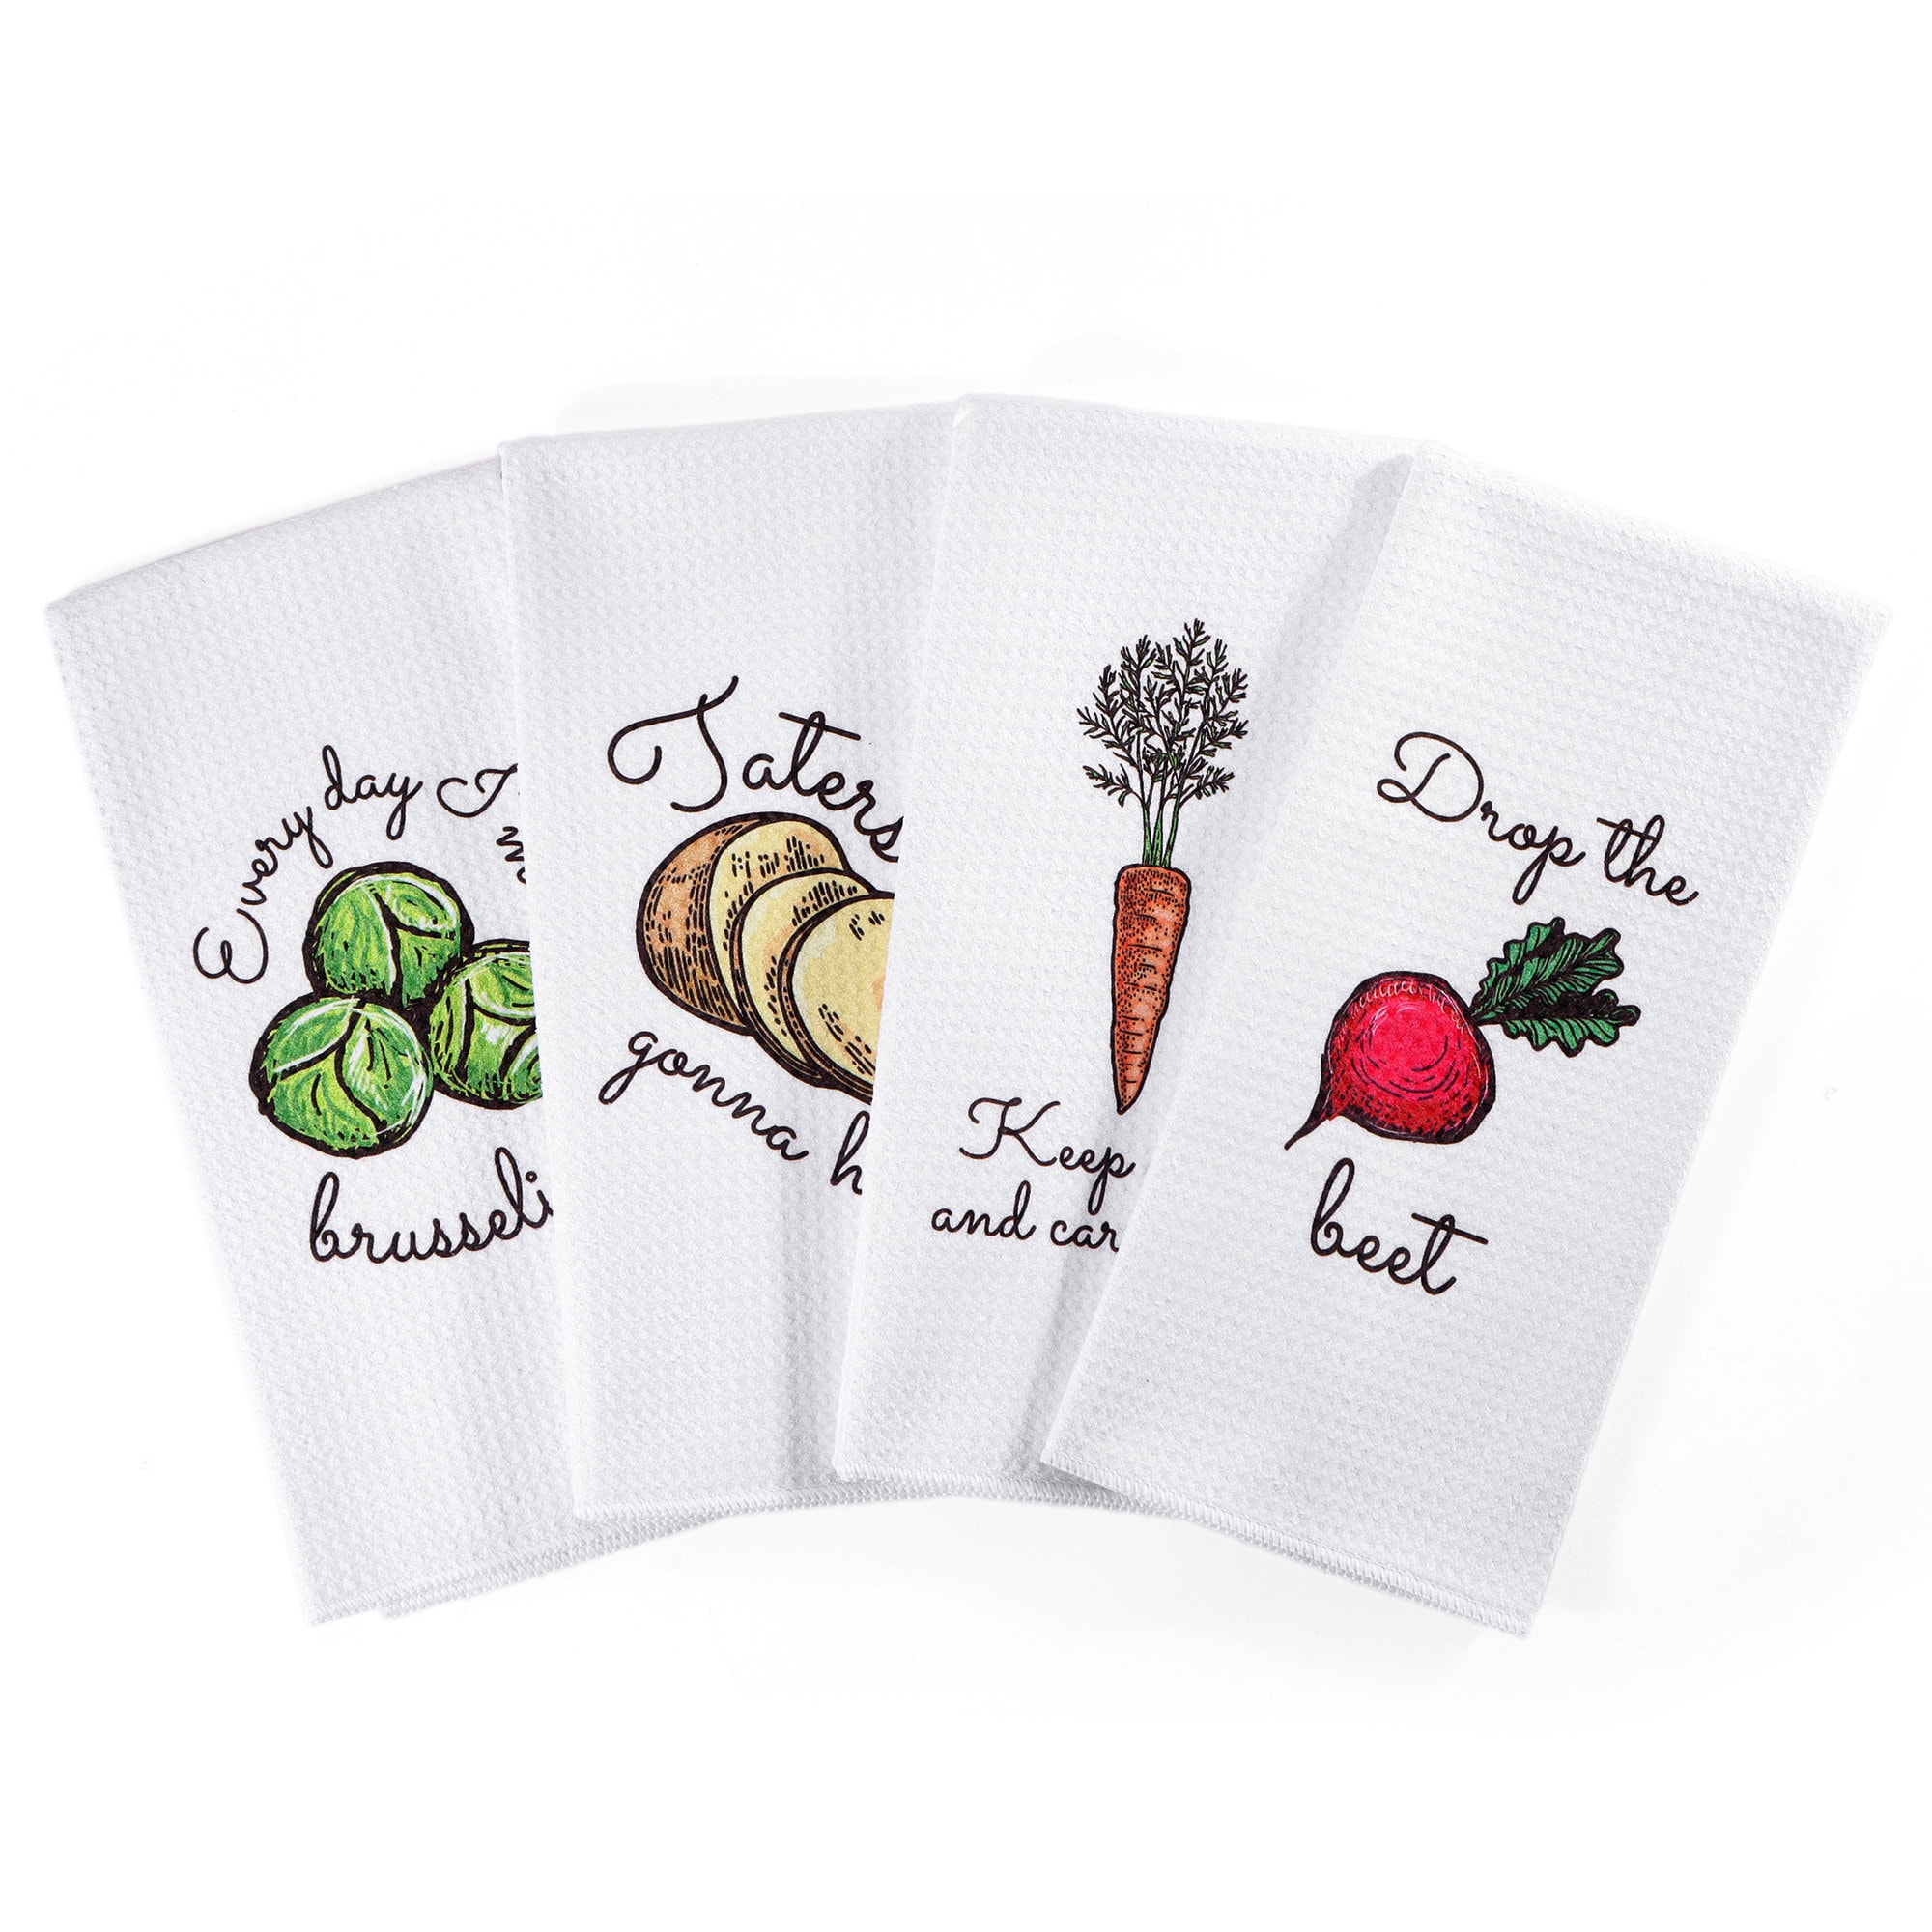 and 1 Potholder 1 Oven Mitt Blooming Thoughts Kitchen Linen Set 4 Piece Bundle Includes 1 Terry Towel 1 Tea Towel 